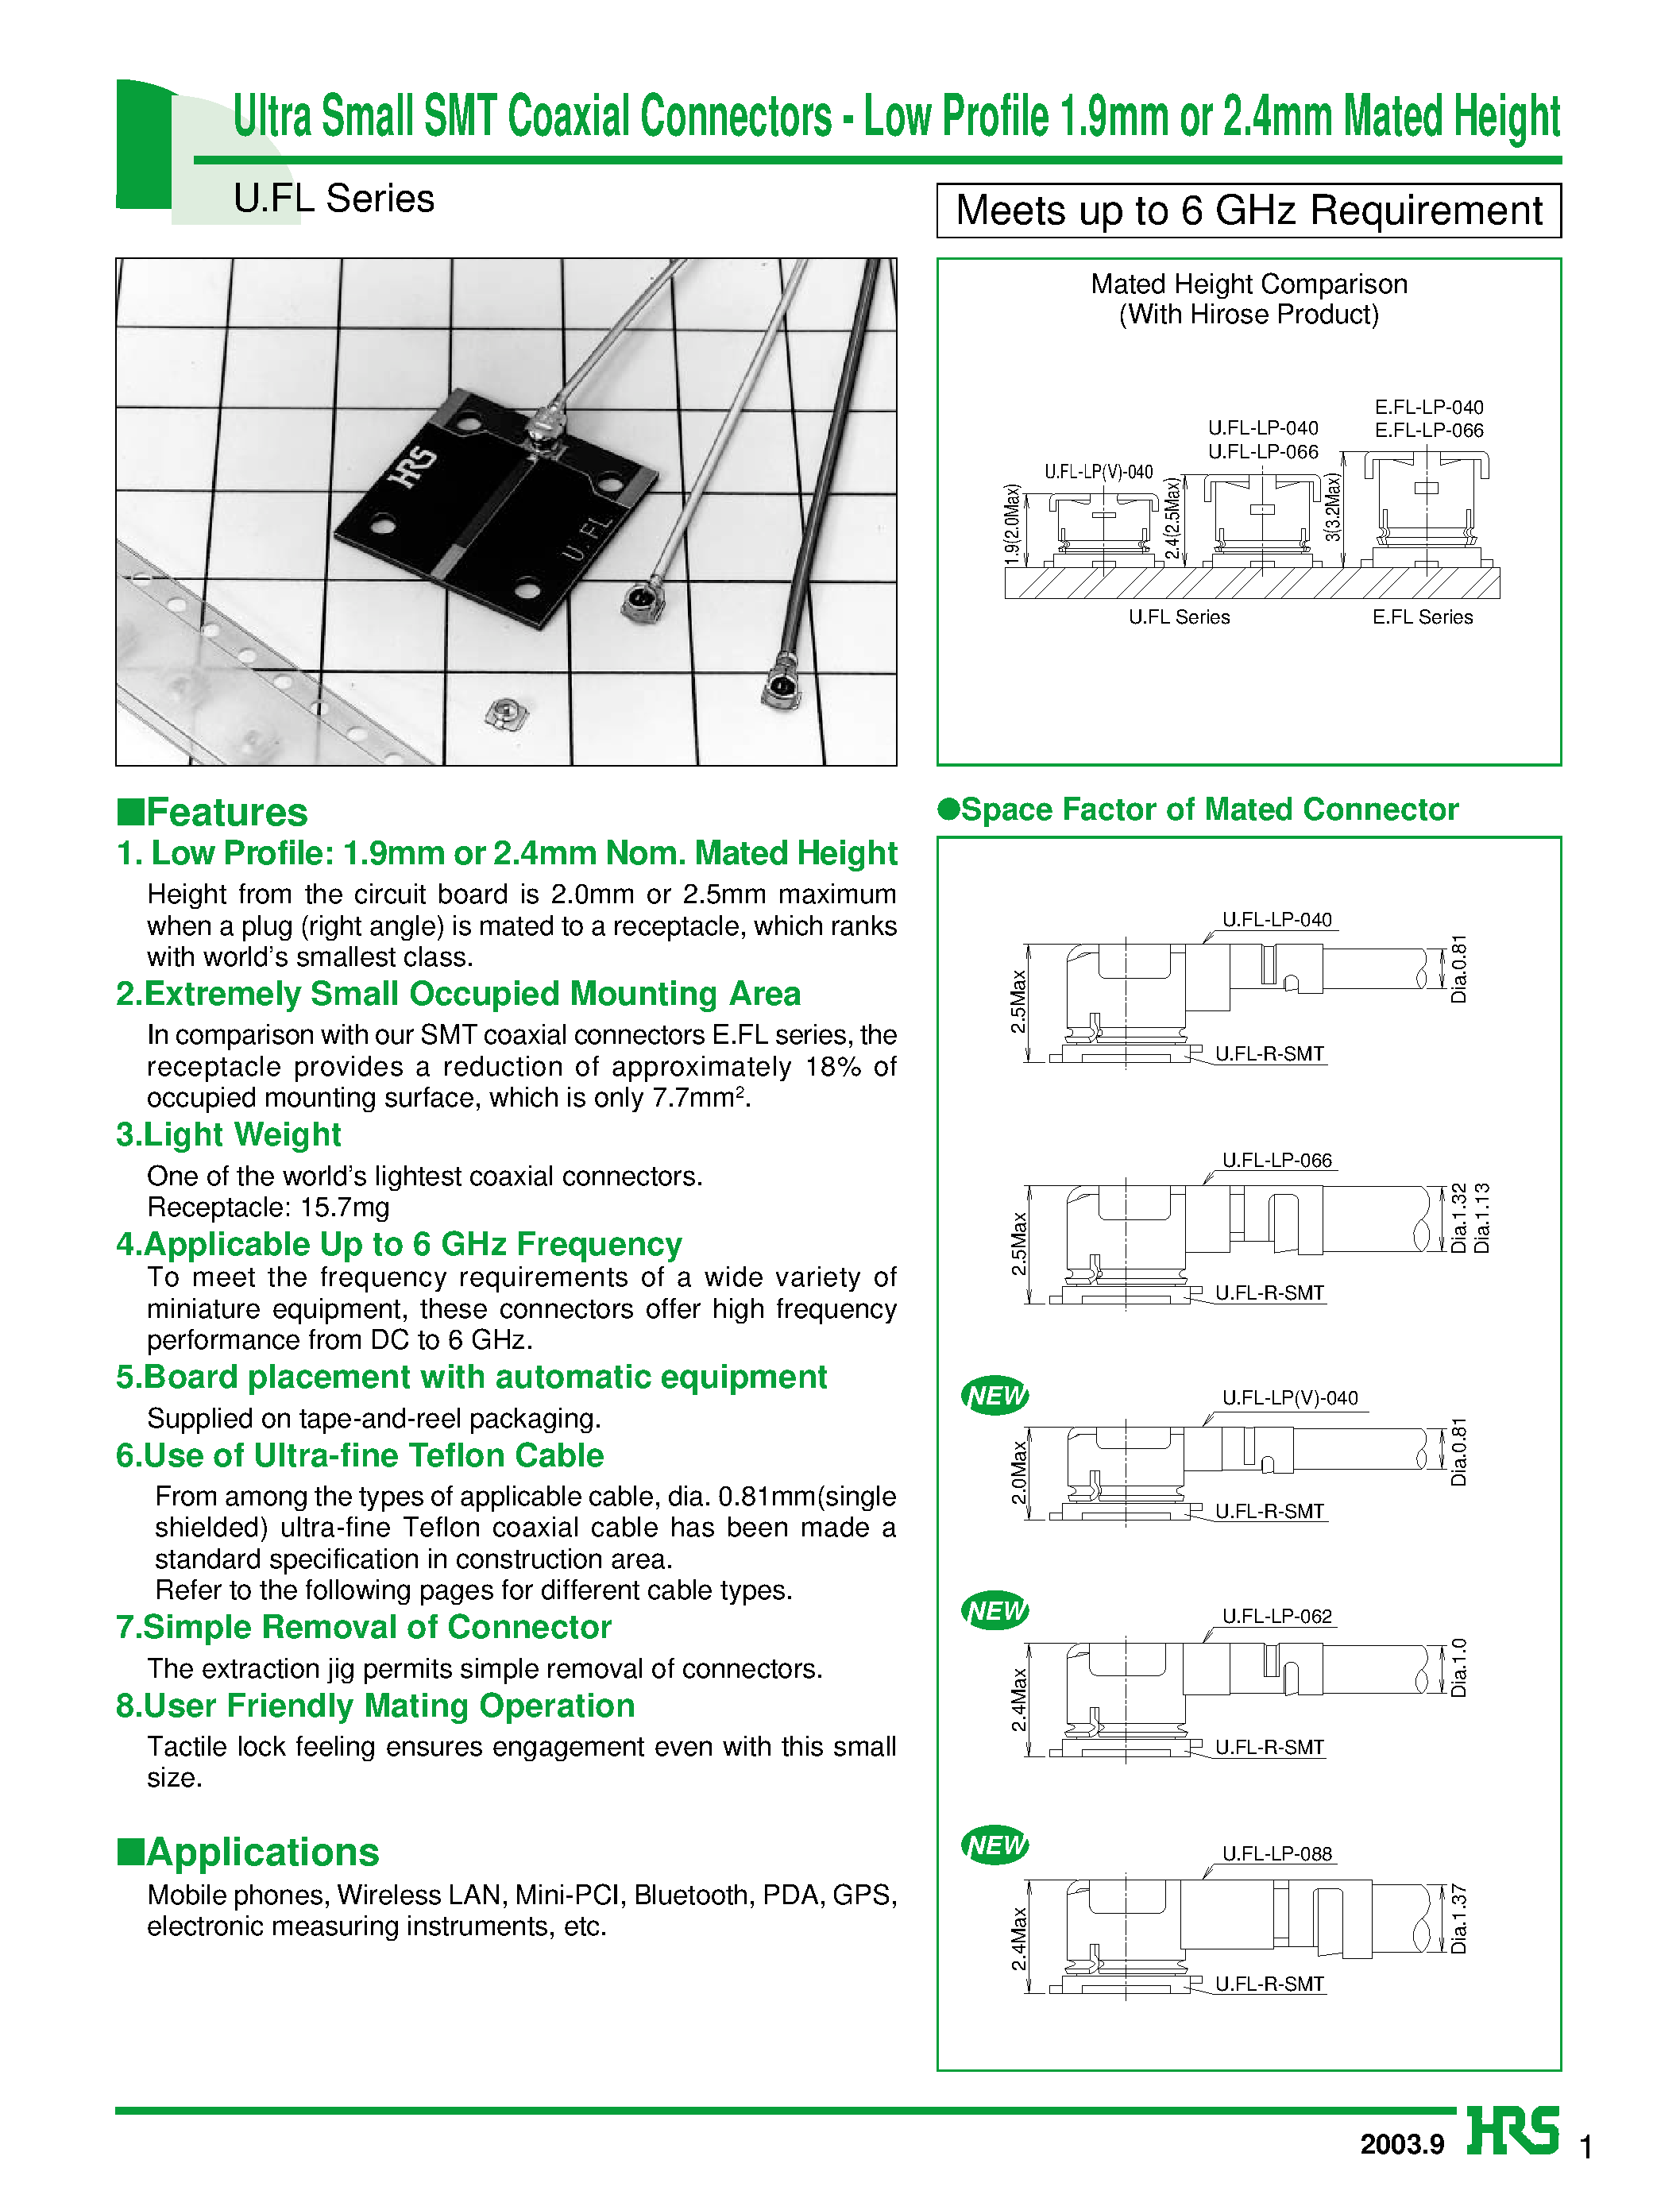 Datasheet HRMP-U.FLJ - Ultra Small SMT Coaxial Connectors - Low Profile 1.9mm or 2.4mm Mated Height page 1